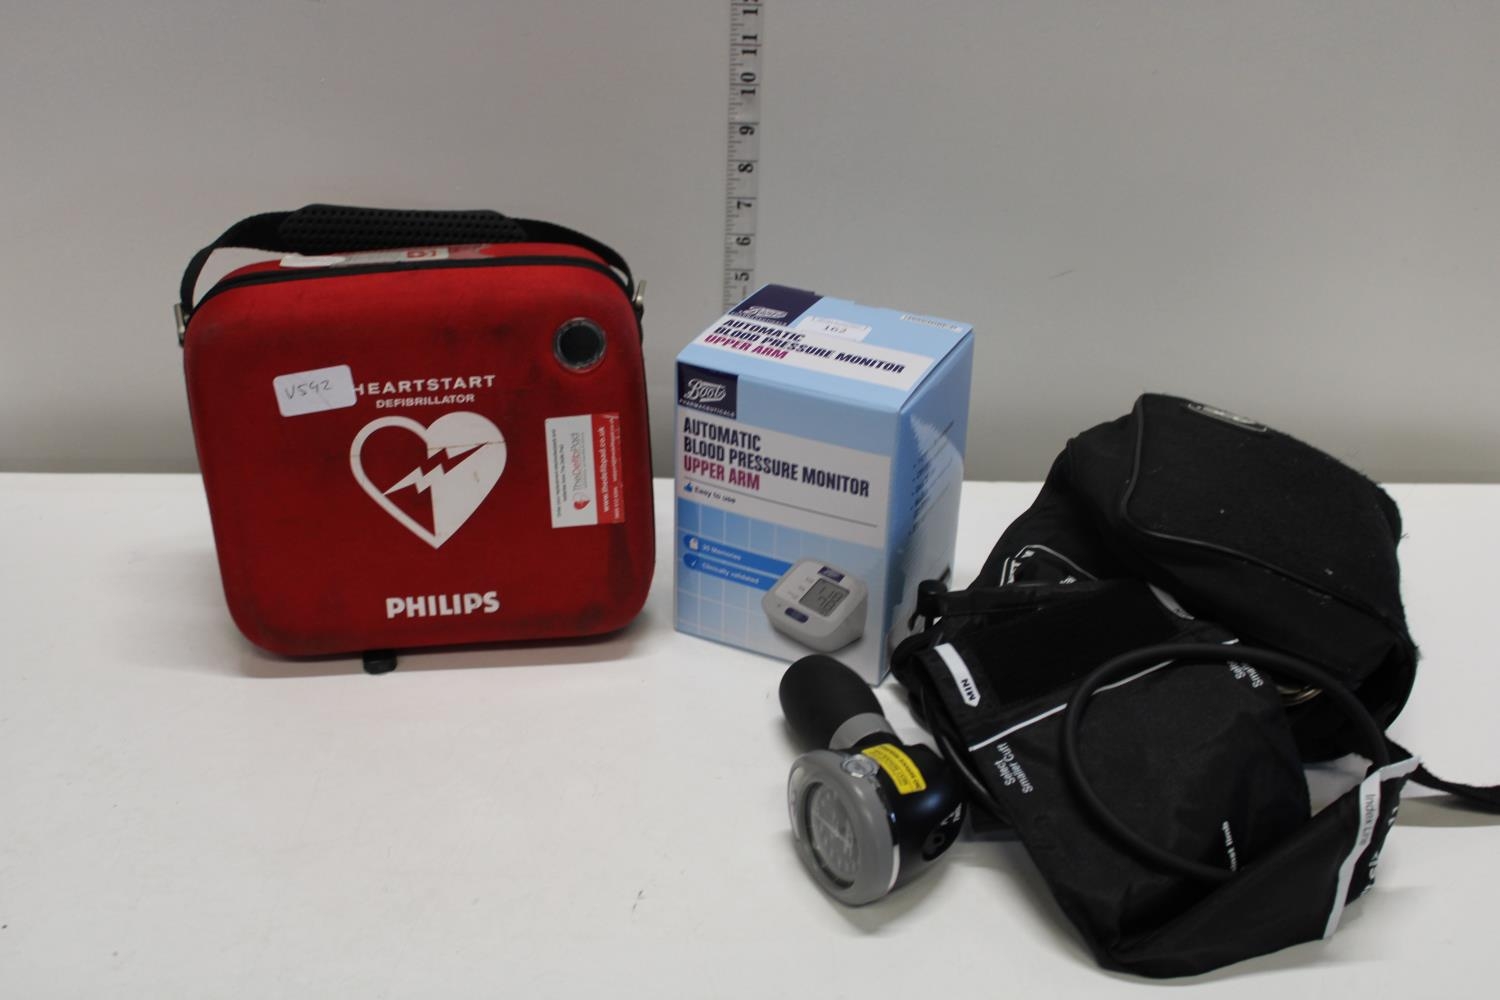 A selection medical equipment including blood pressure monitors and a defibrillator.